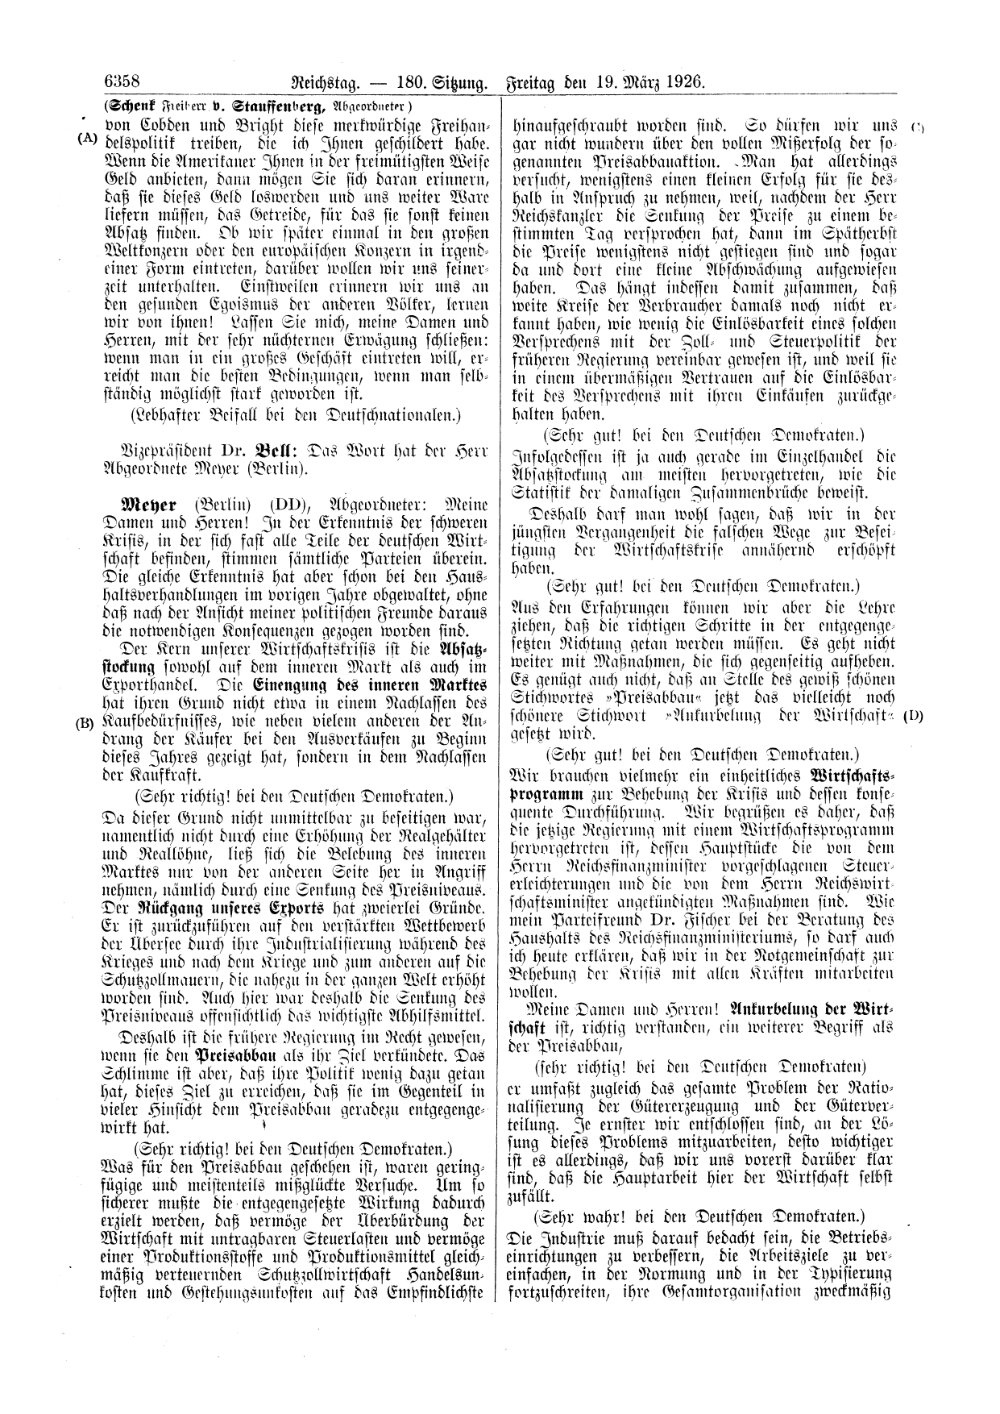 Scan of page 6358